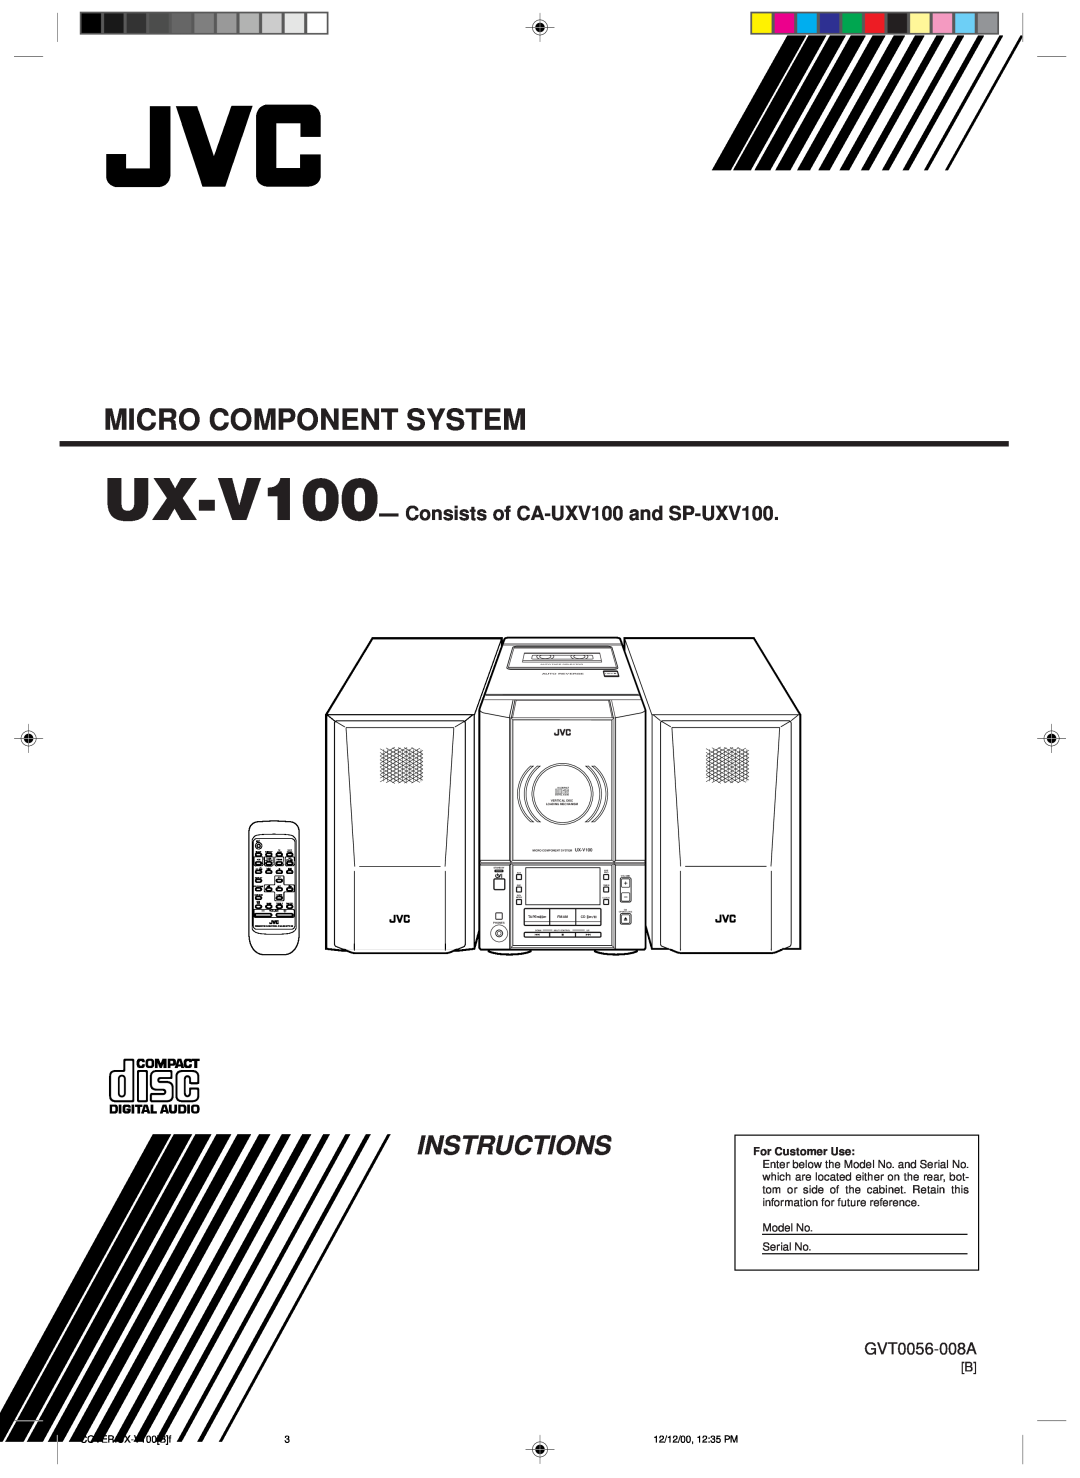 JVC 20981IEN manual UX-V100-Consists of CA-UXV100and SP-UXV100, Micro Component System, Instructions, GVT0056-008A, Tape 